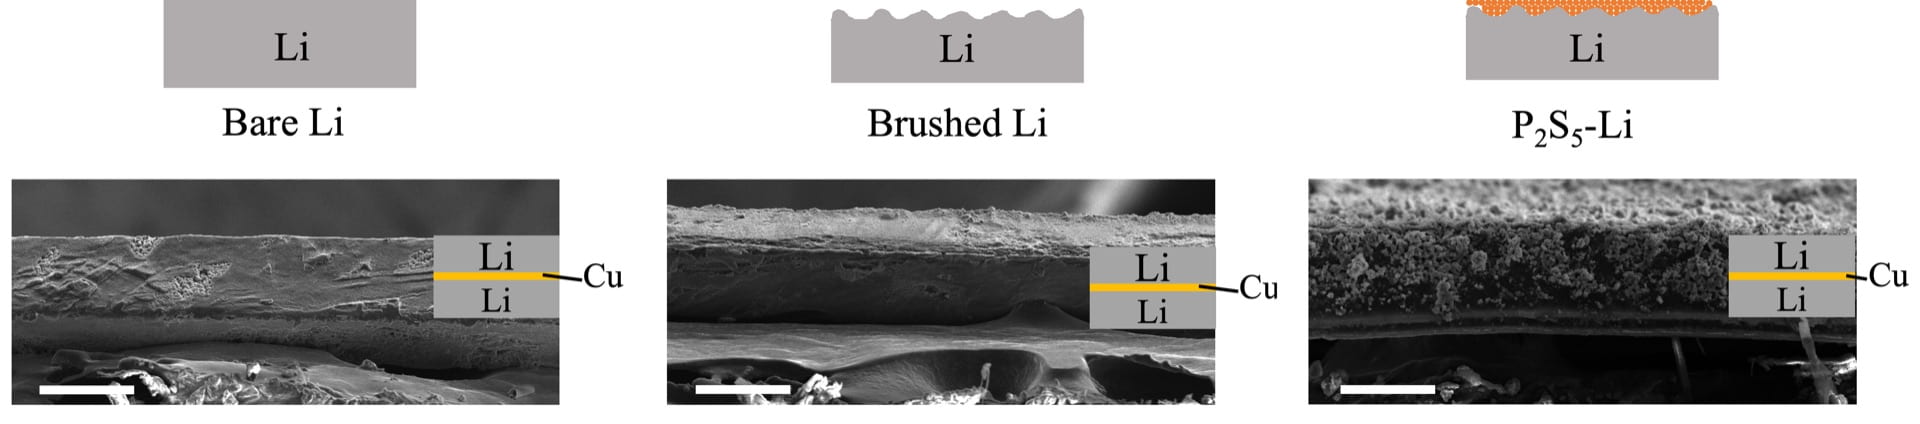 Scanning electron microscope images show a sequence of lithium foils